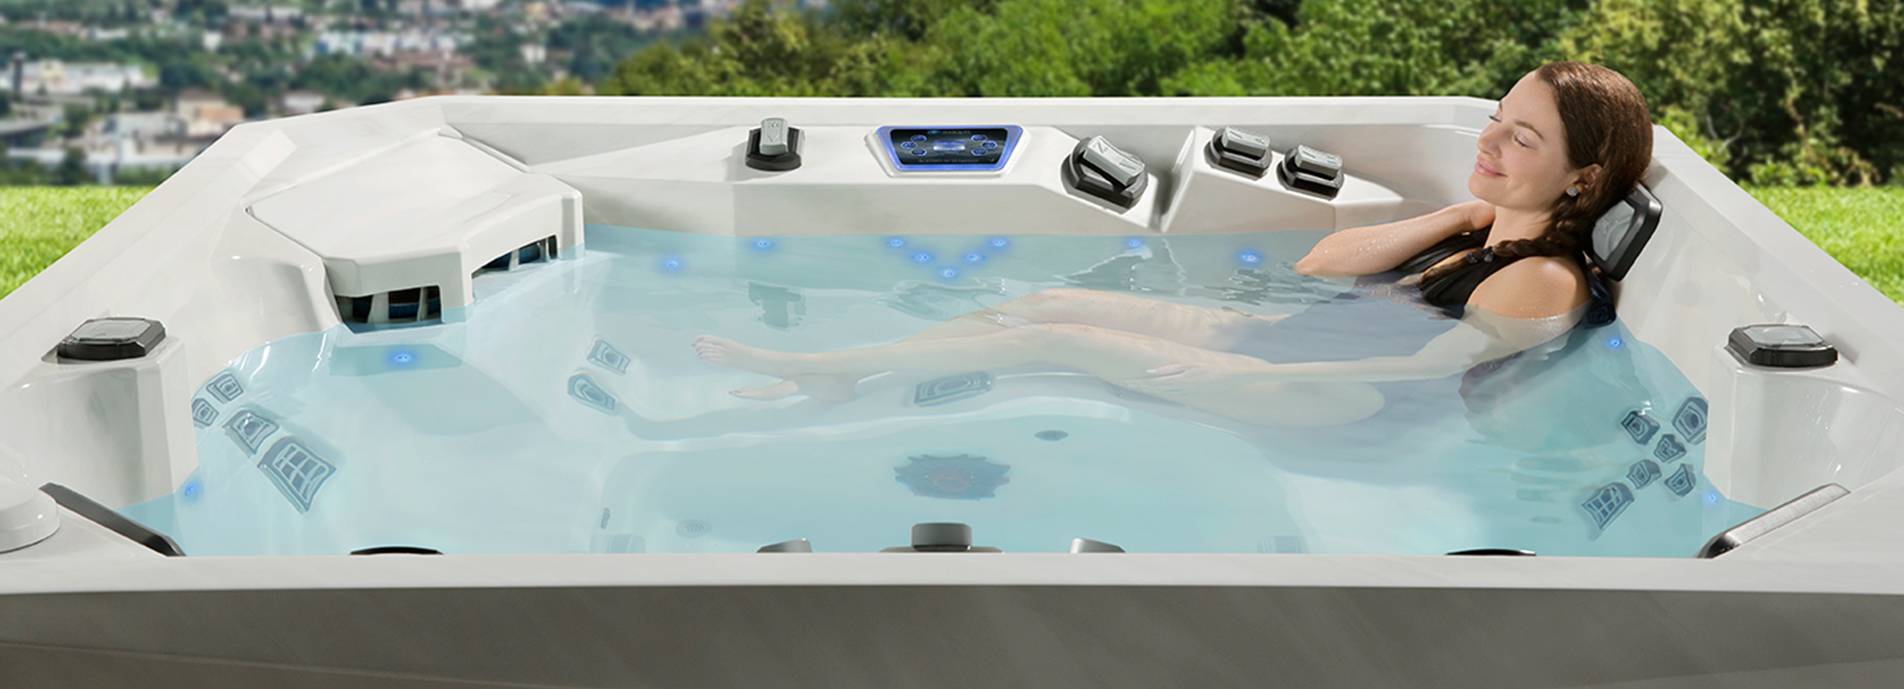 beauty image showing Vector21 Hot Tubs